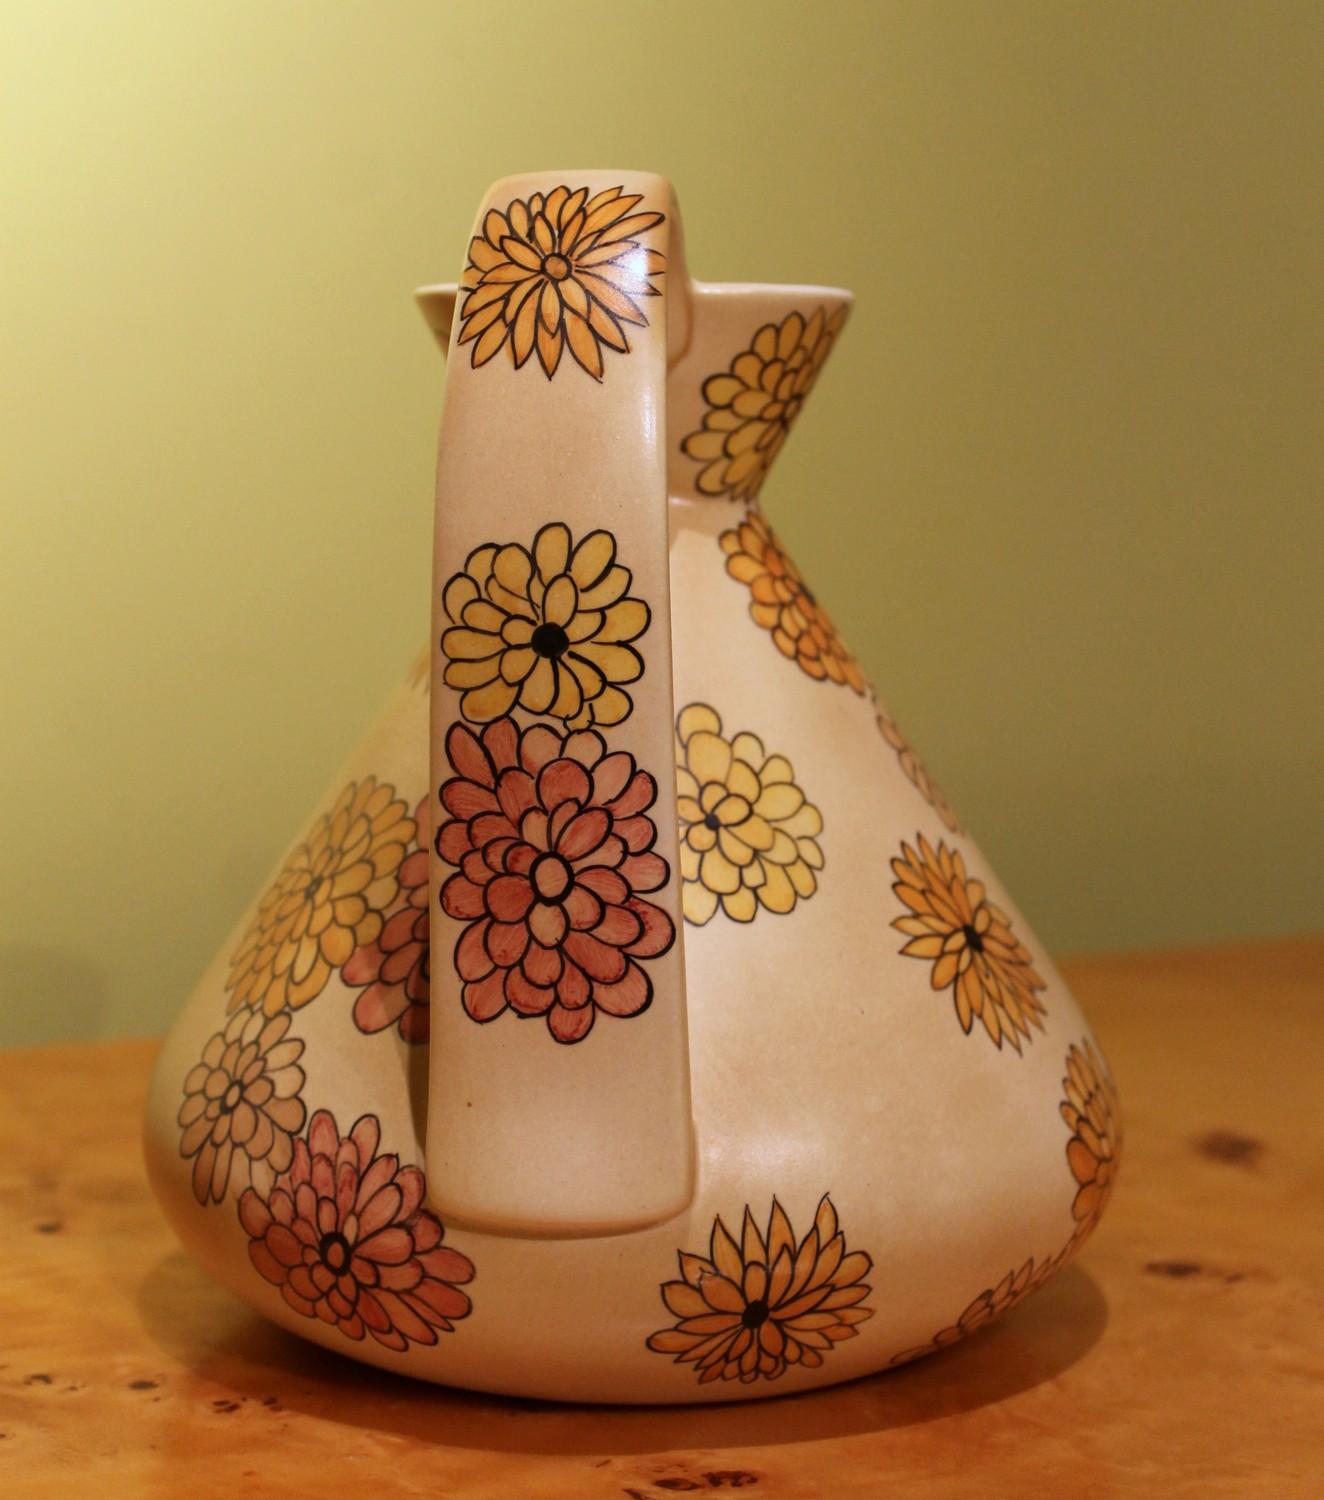 Lenci Italian Art Deco Ceramic Jug, Pitcher and Tray Set with Floral Patterns In Good Condition For Sale In Firenze, IT